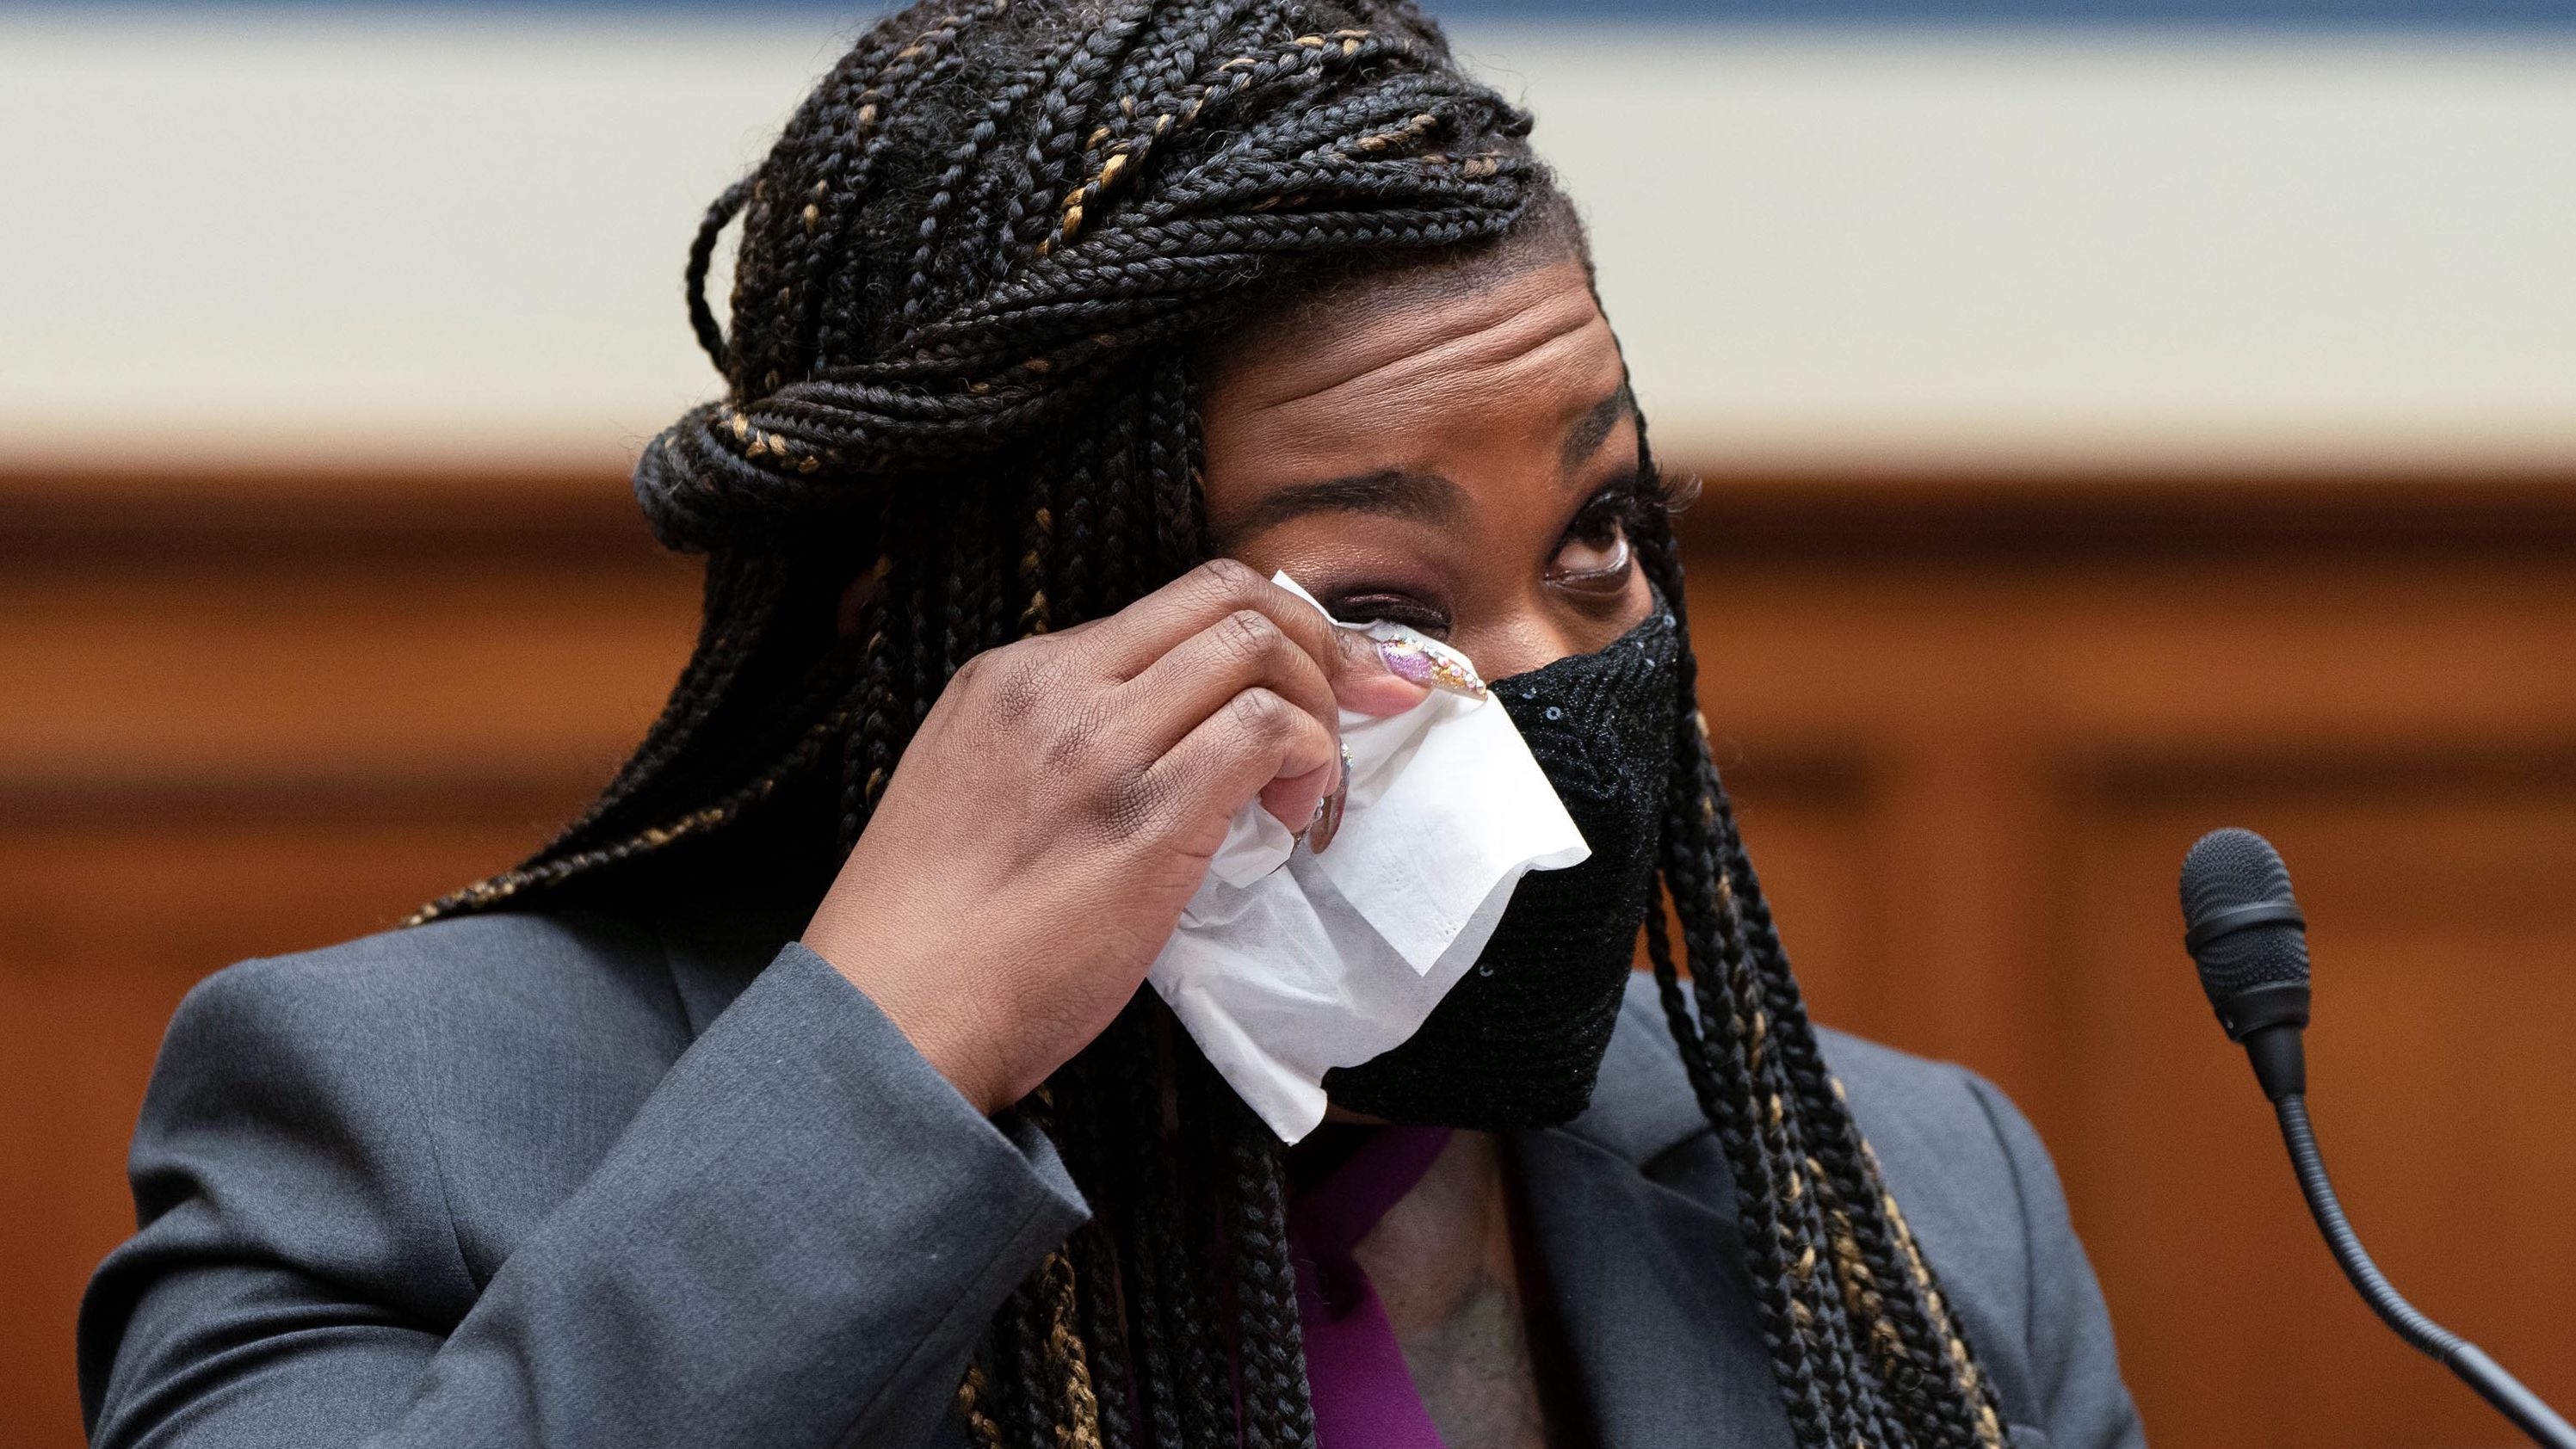 Rep. Cori Bush, D-Mo., wipes away a tear as she prepares to testify about her experience being raped and a subsequent abortion, Thursday, Sept. 30, 2021, during a House Committee on Oversight and Reform hearing on Capitol Hill in Washington.